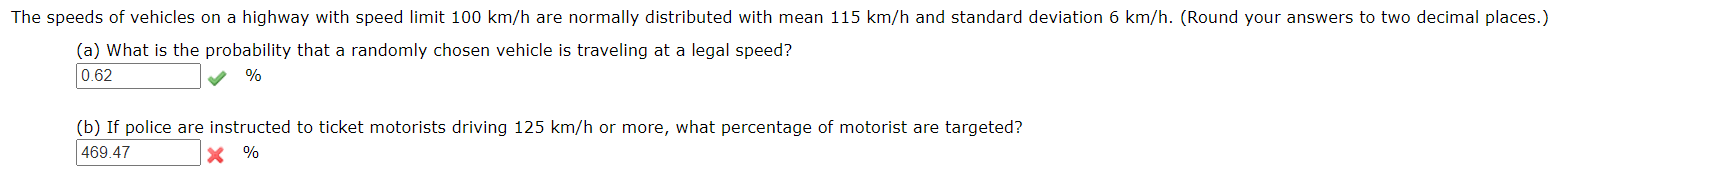 The speeds of vehicles on a highway with speed limit 100 km/h are normally distributed with mean 115 km/h and standard deviation 6 km/h. (Round your answers to two decimal places.)
(a) What is the probability that a randomly chosen vehicle is traveling at a legal speed?
0.62
%
(b) If police are instructed to ticket motorists driving 125 km/h or more, what percentage of motorist are targeted?
469.47
%
